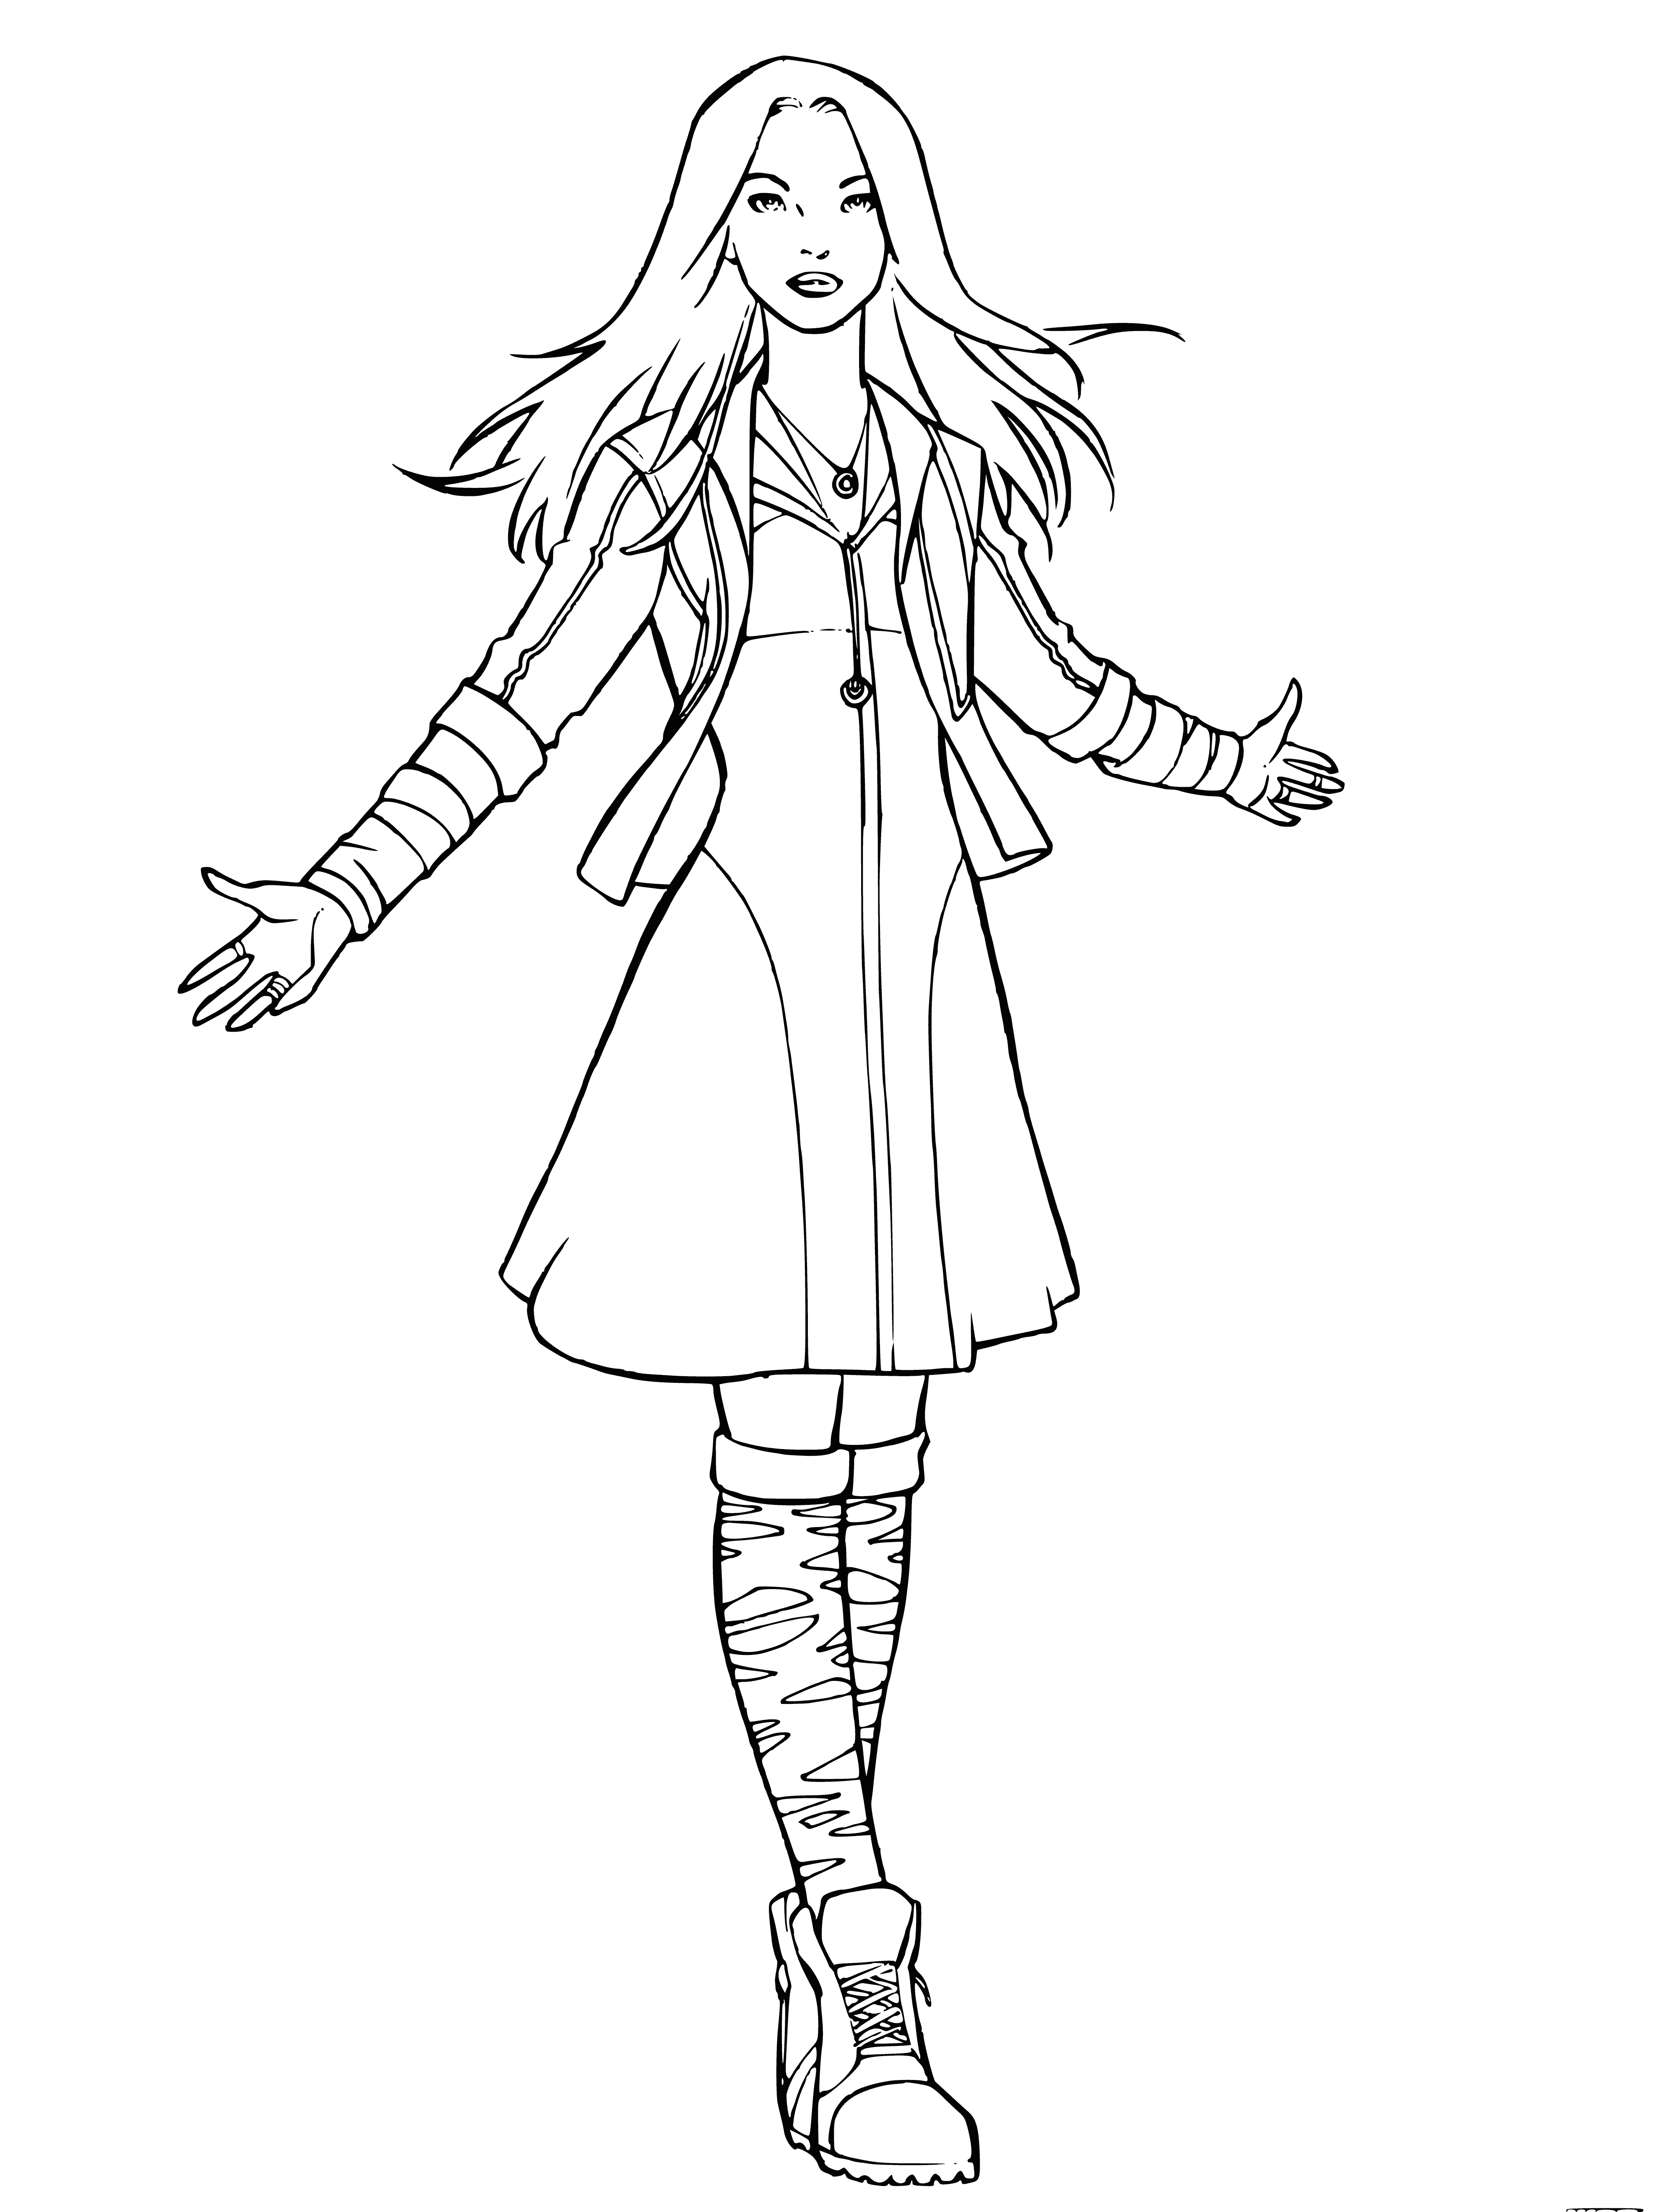 coloring page: Scarlet Witch raises her hands, releasing a powerful red stream of energy with a determined look.